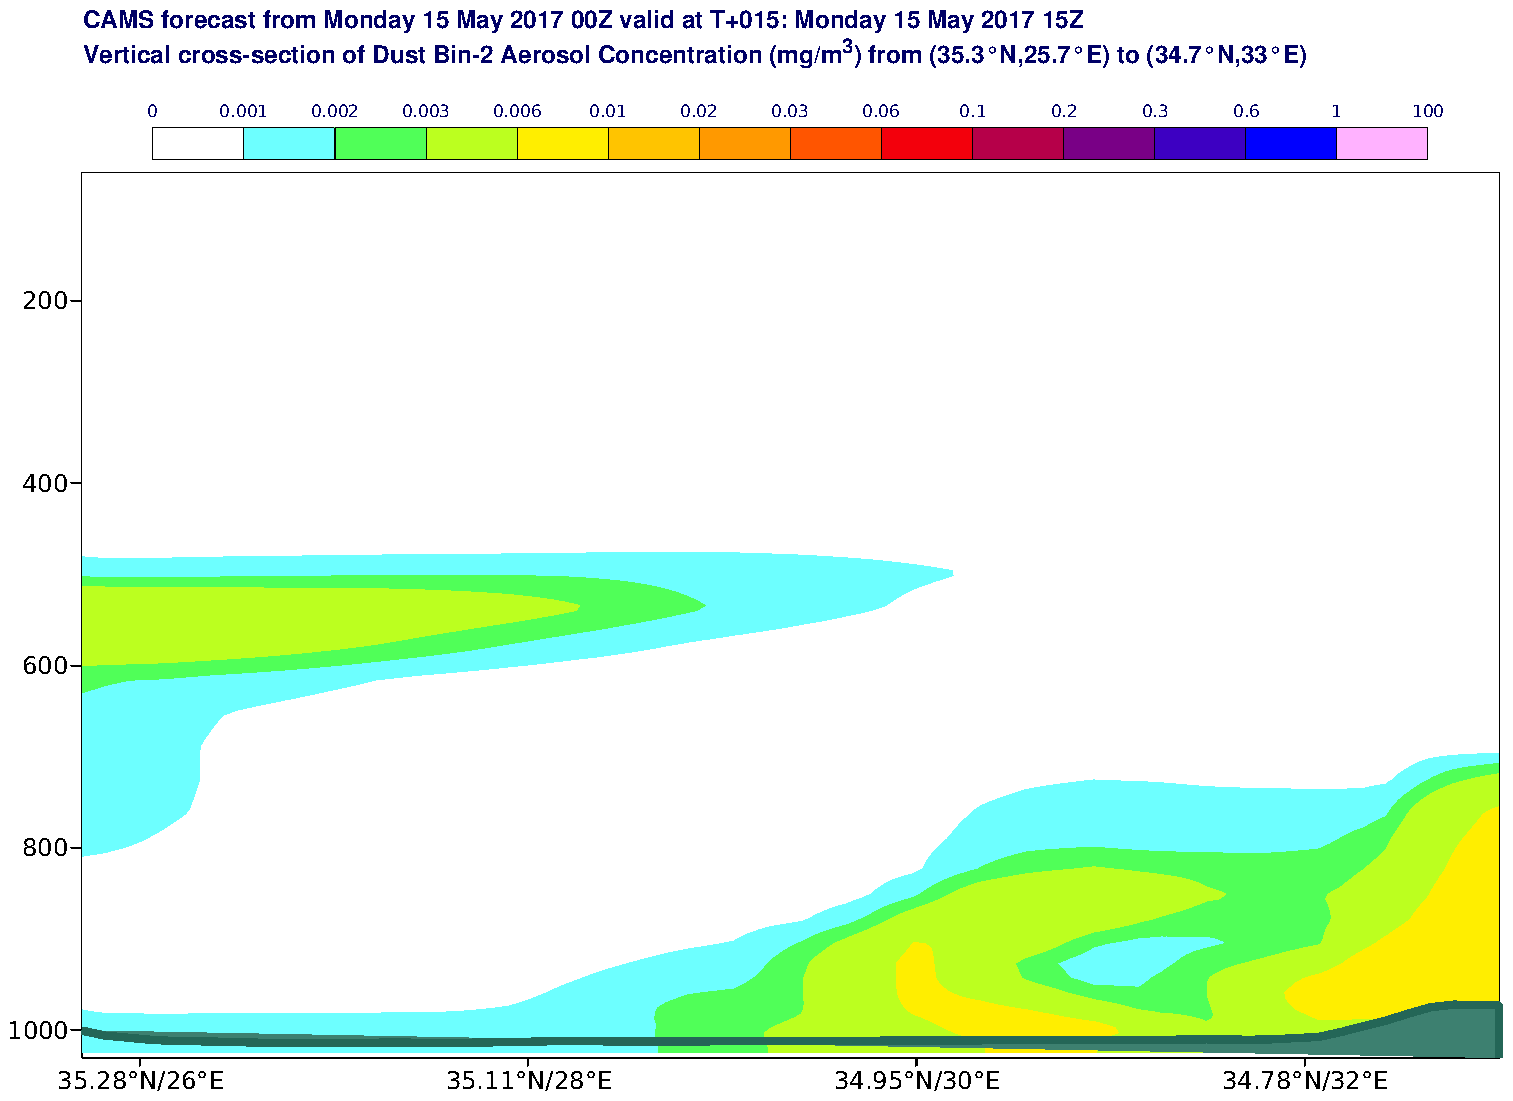 Vertical cross-section of Dust Bin-2 Aerosol Concentration (mg/m3) valid at T15 - 2017-05-15 15:00